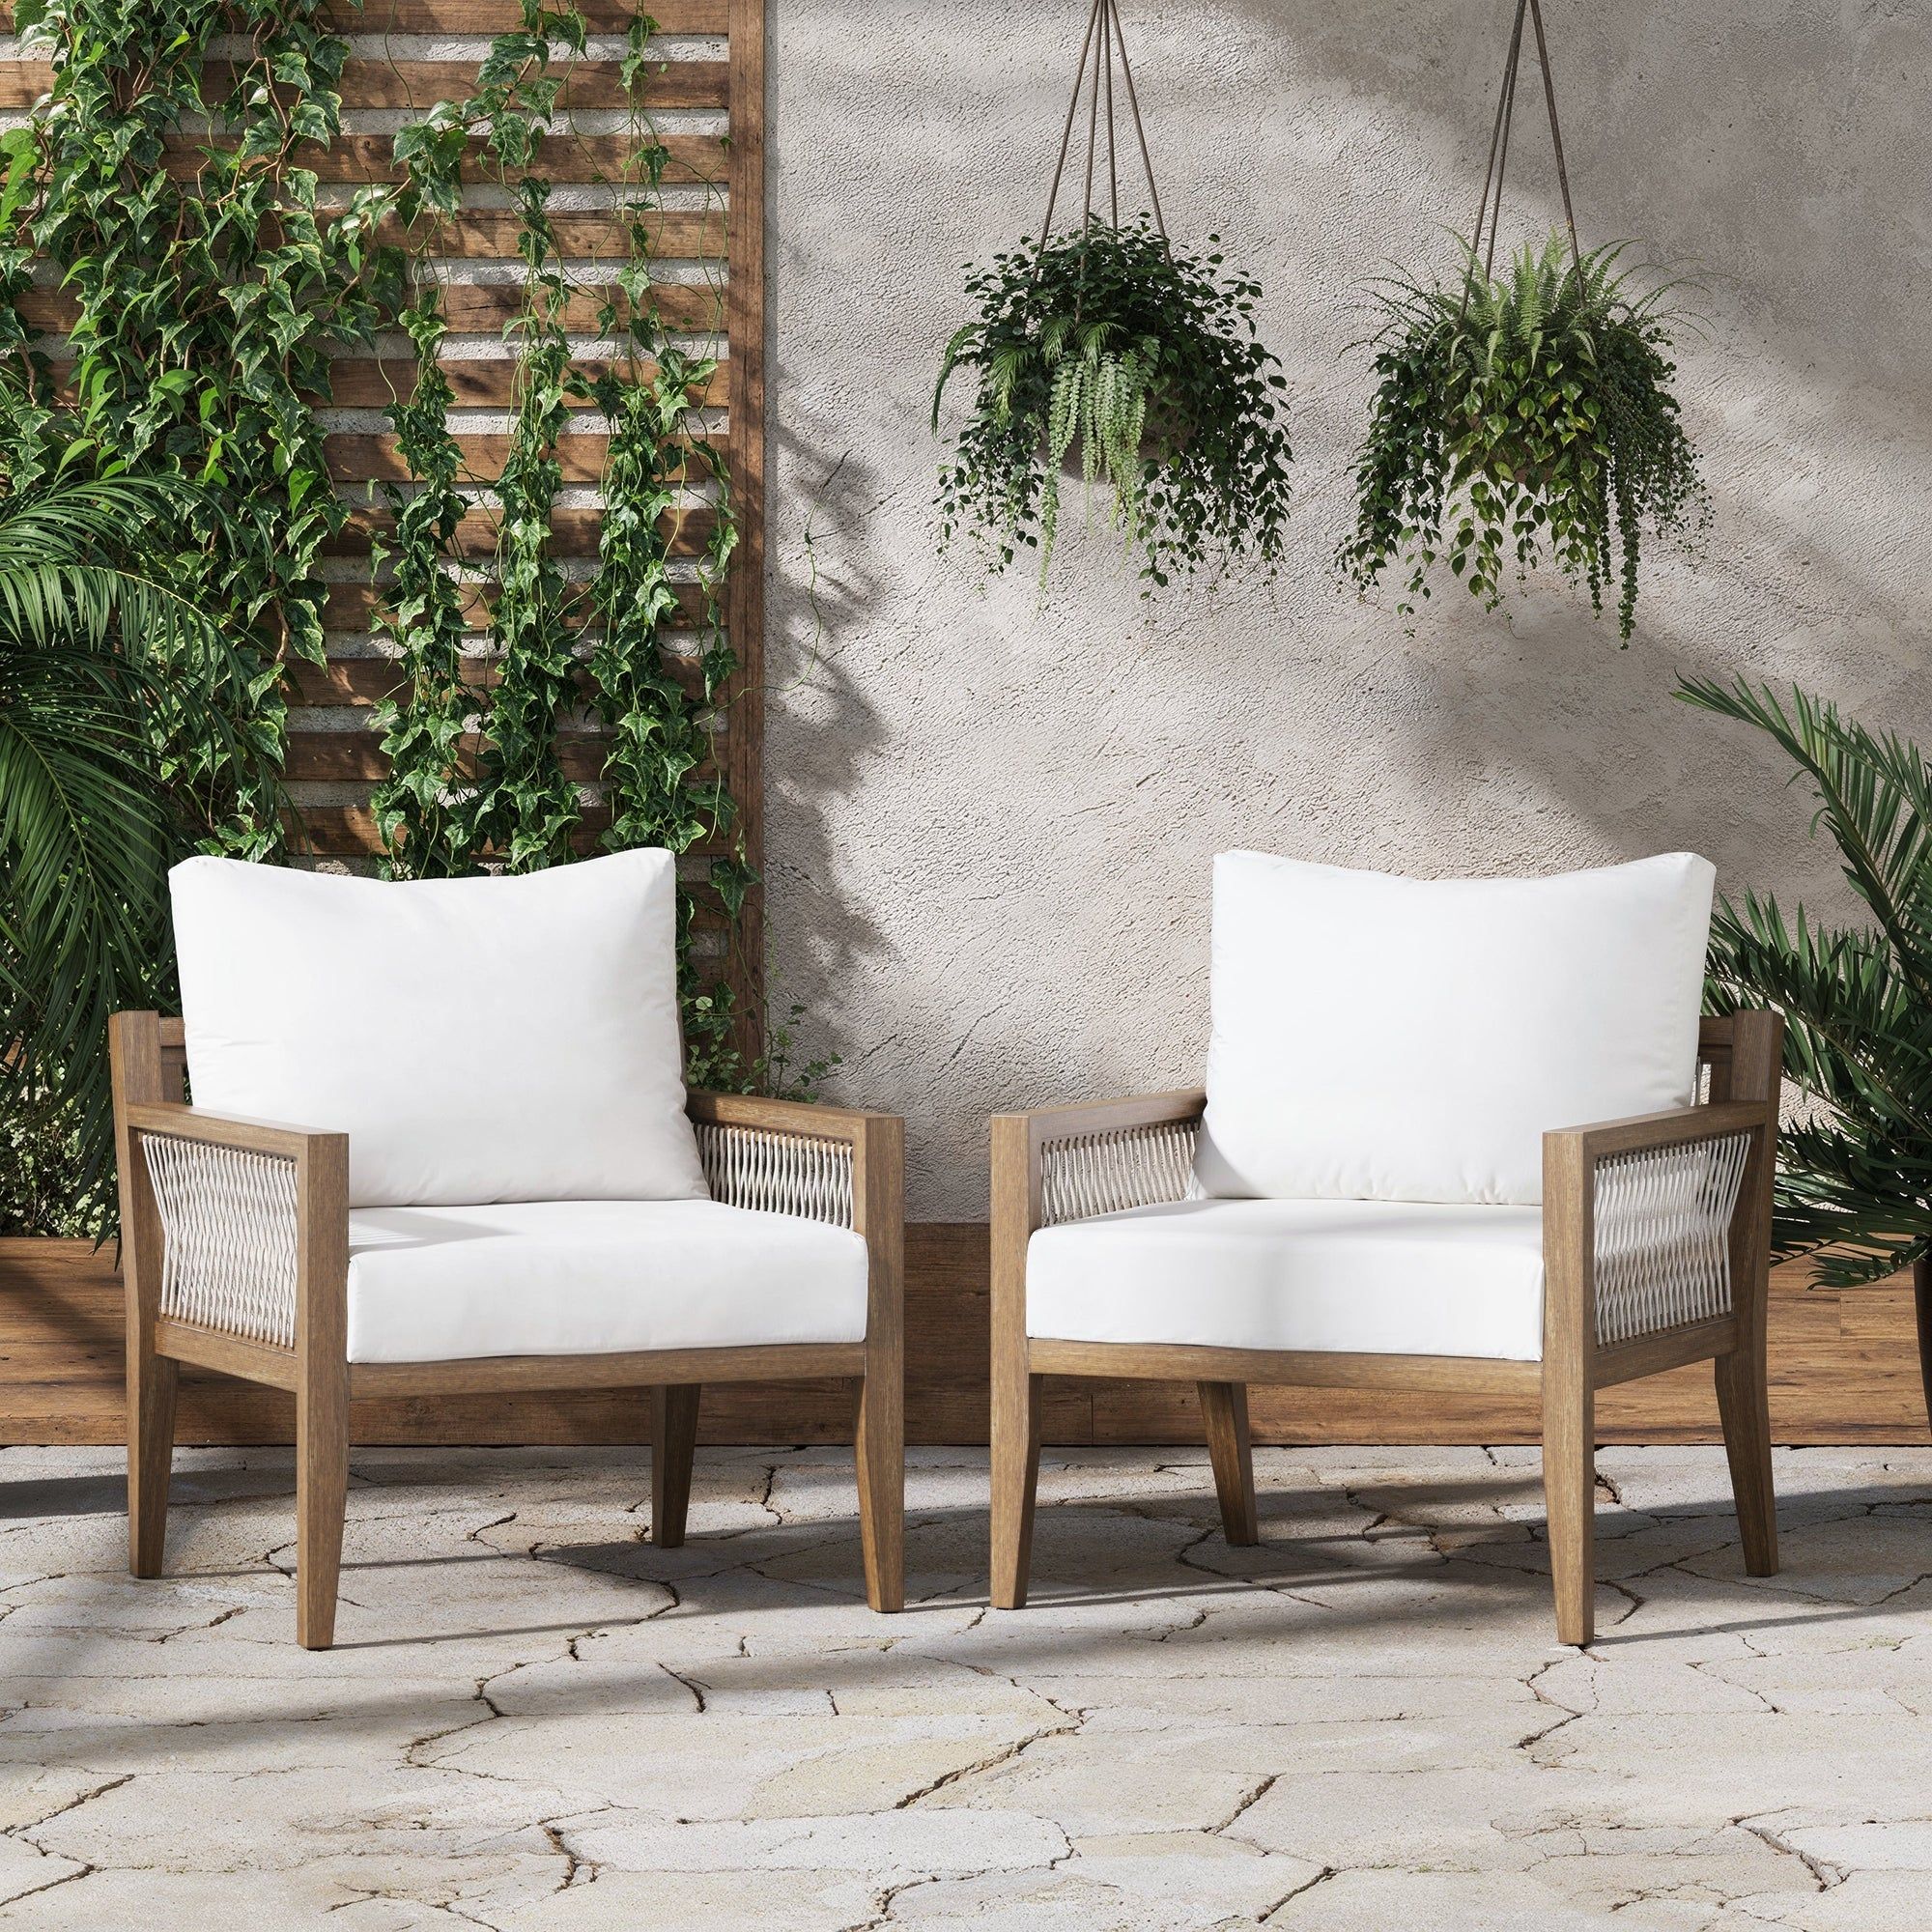 Set of 2 Outdoor Patio Arm Chairs White | Nathan James